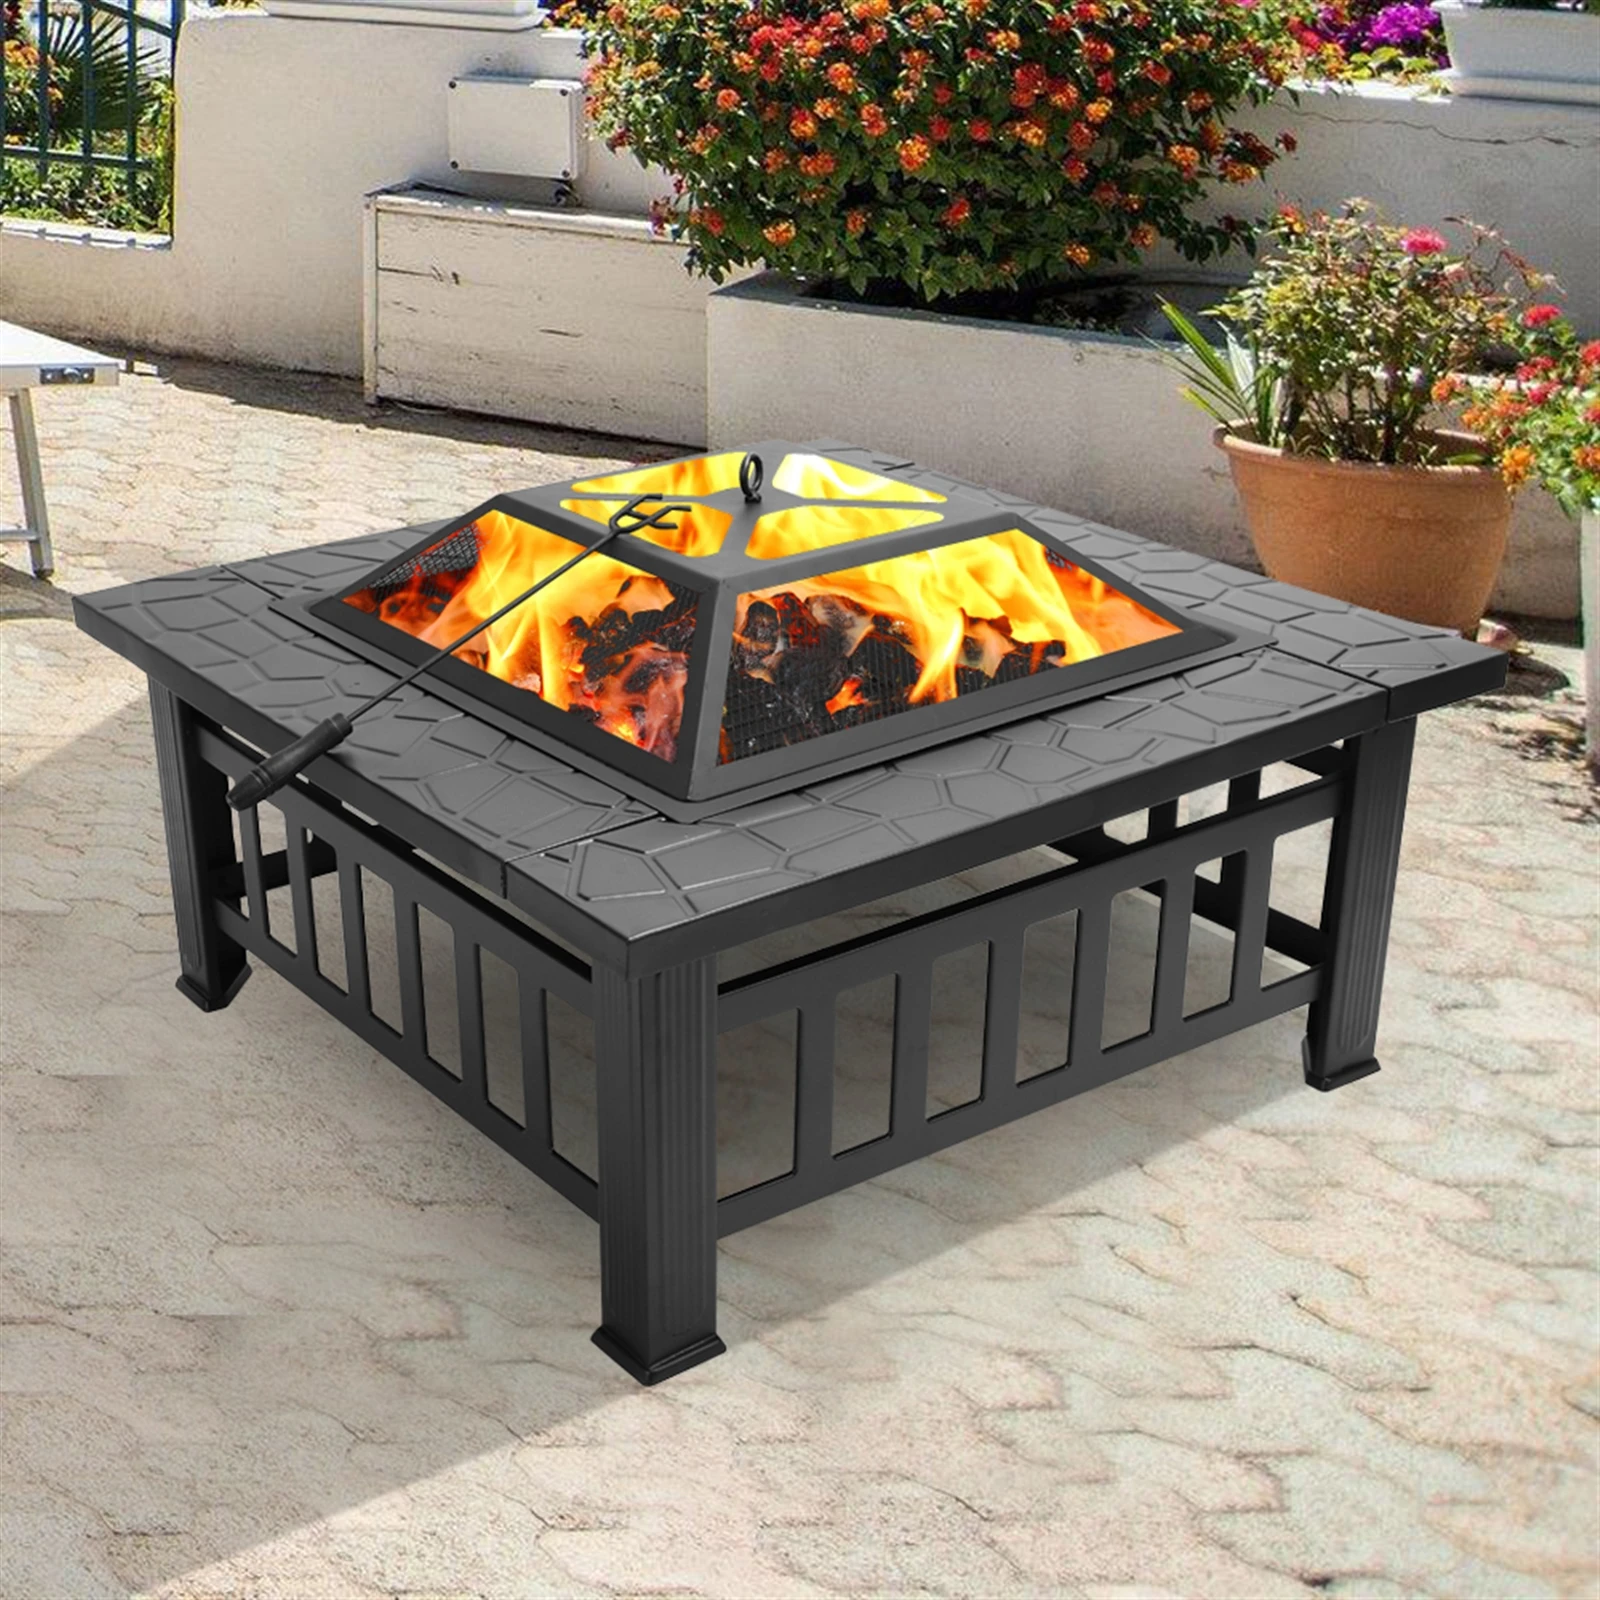 82x82x44cm Fire Bowl with Spark Protection Grill Grate Fire Pit Garden Patio Heat Cooling BBQ Winter Summer Camping Heater Black